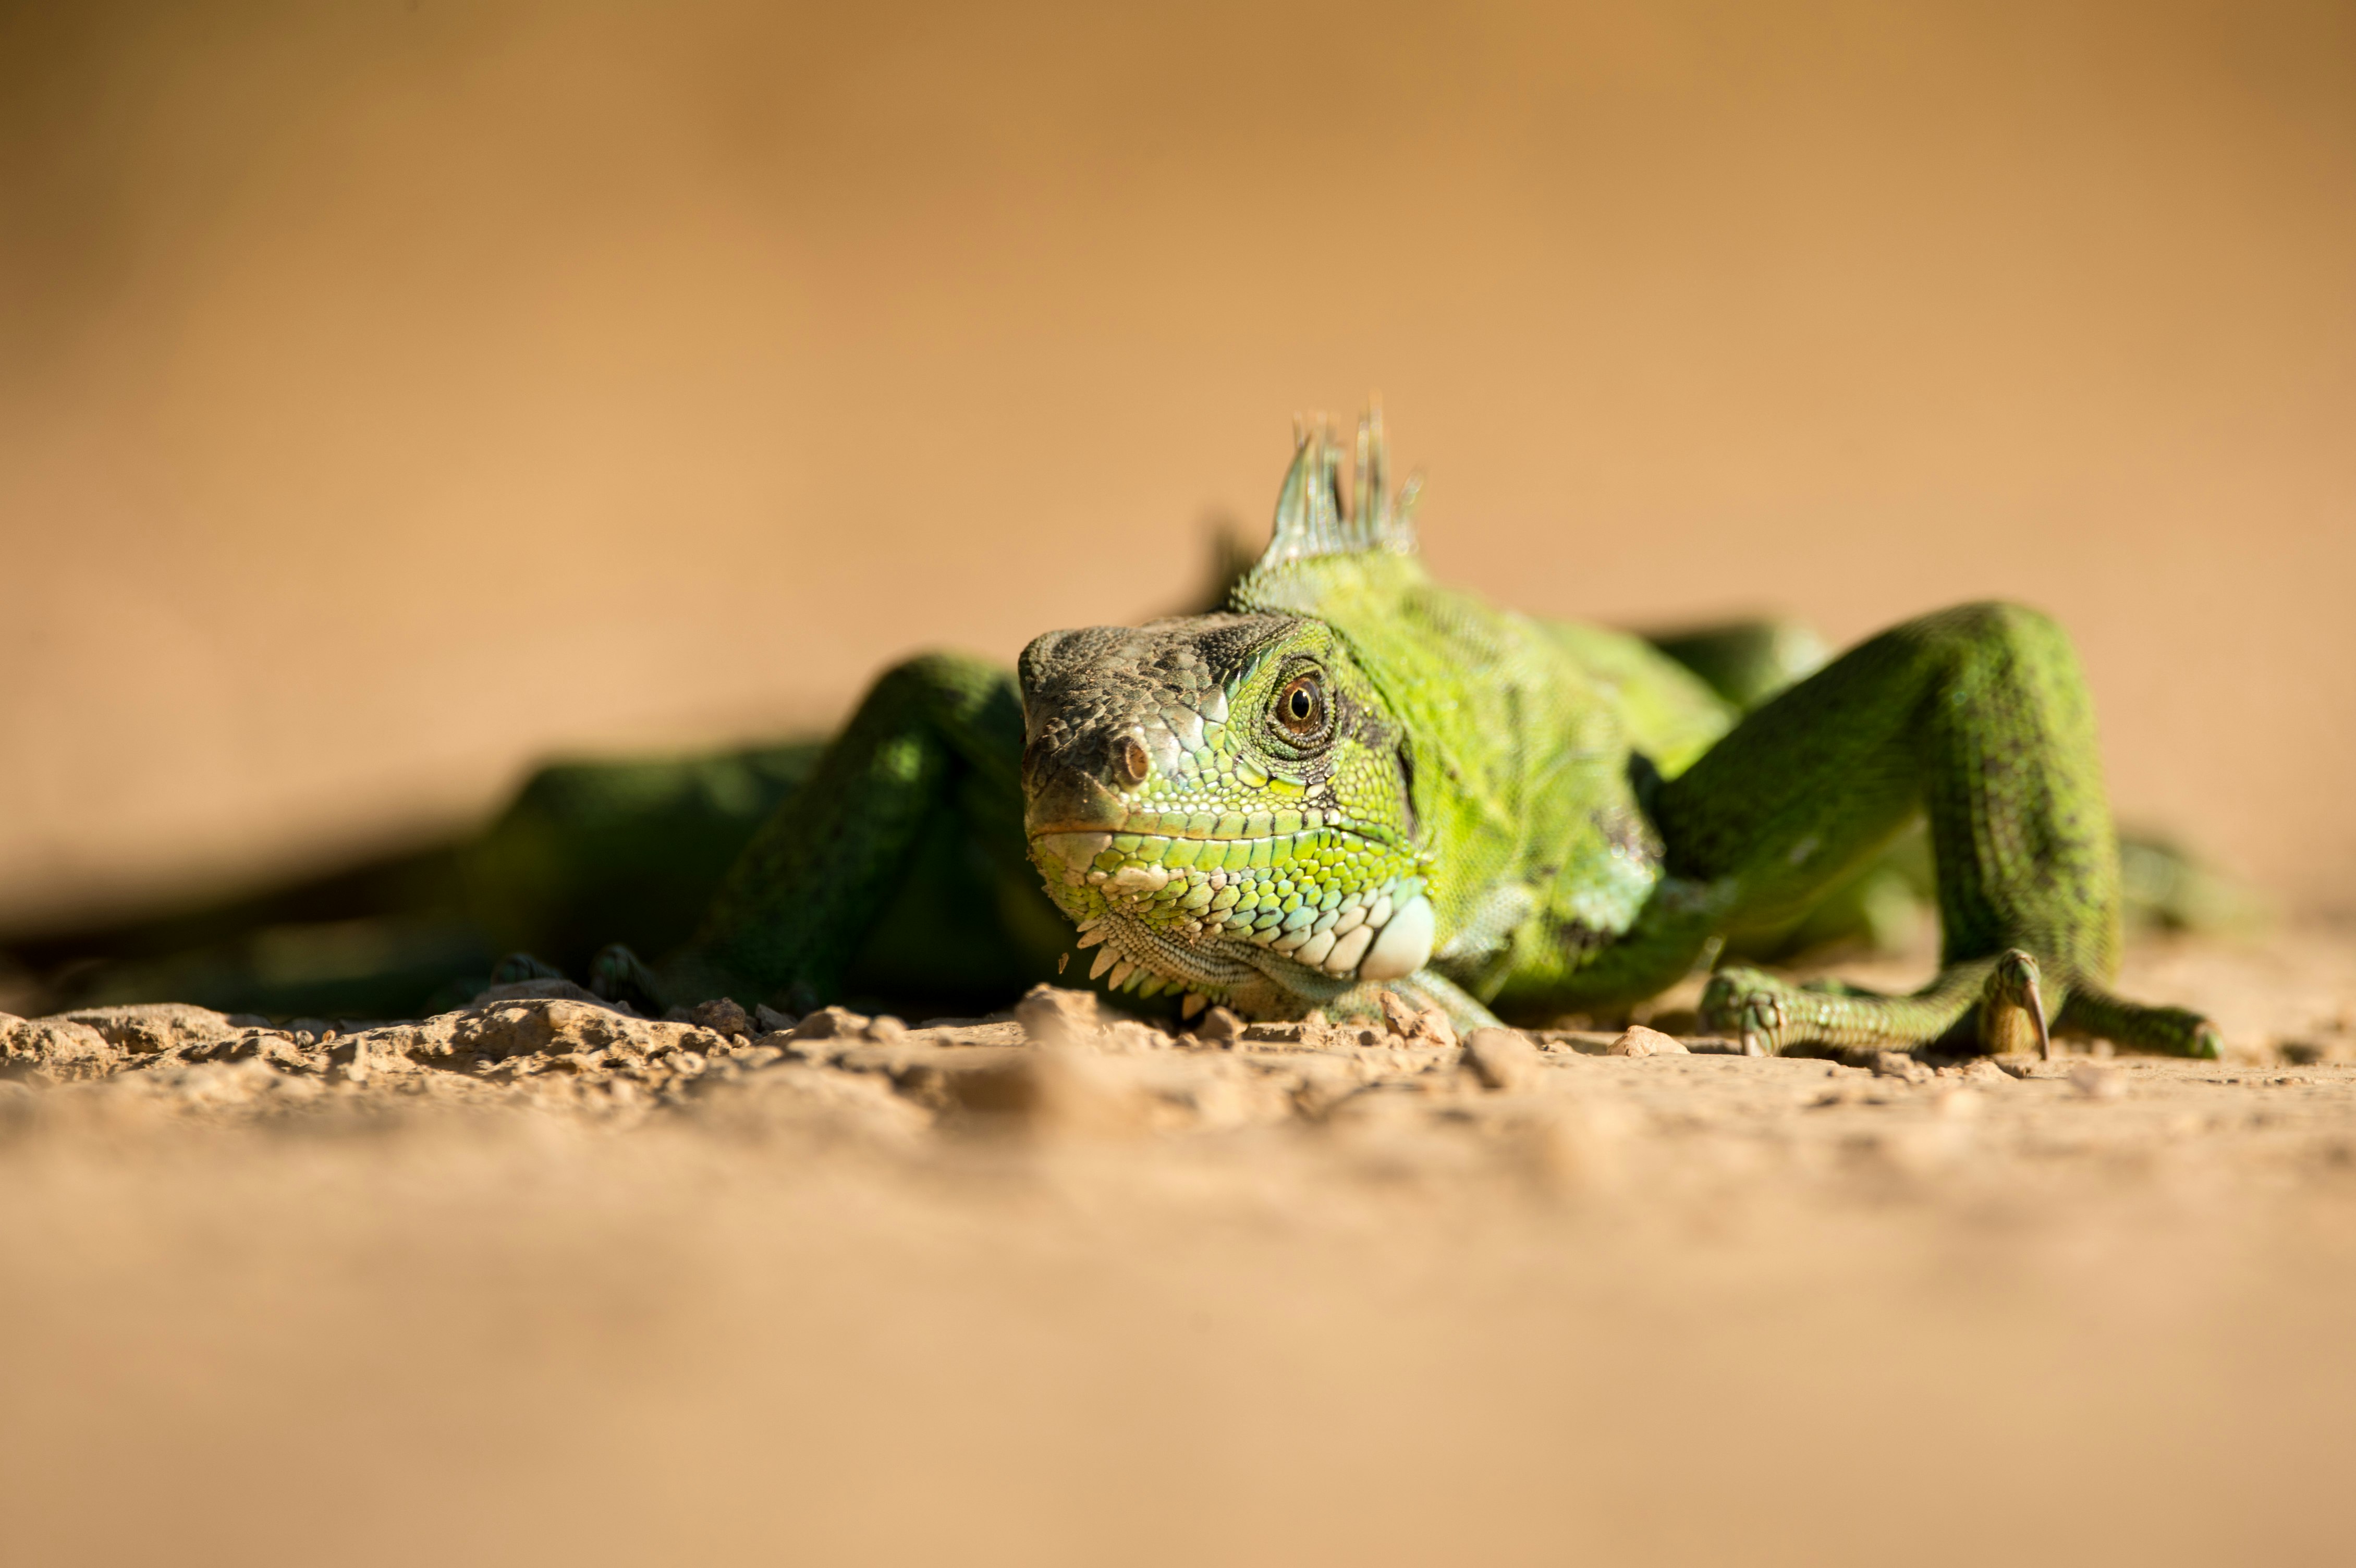 green and white lizard on brown soil